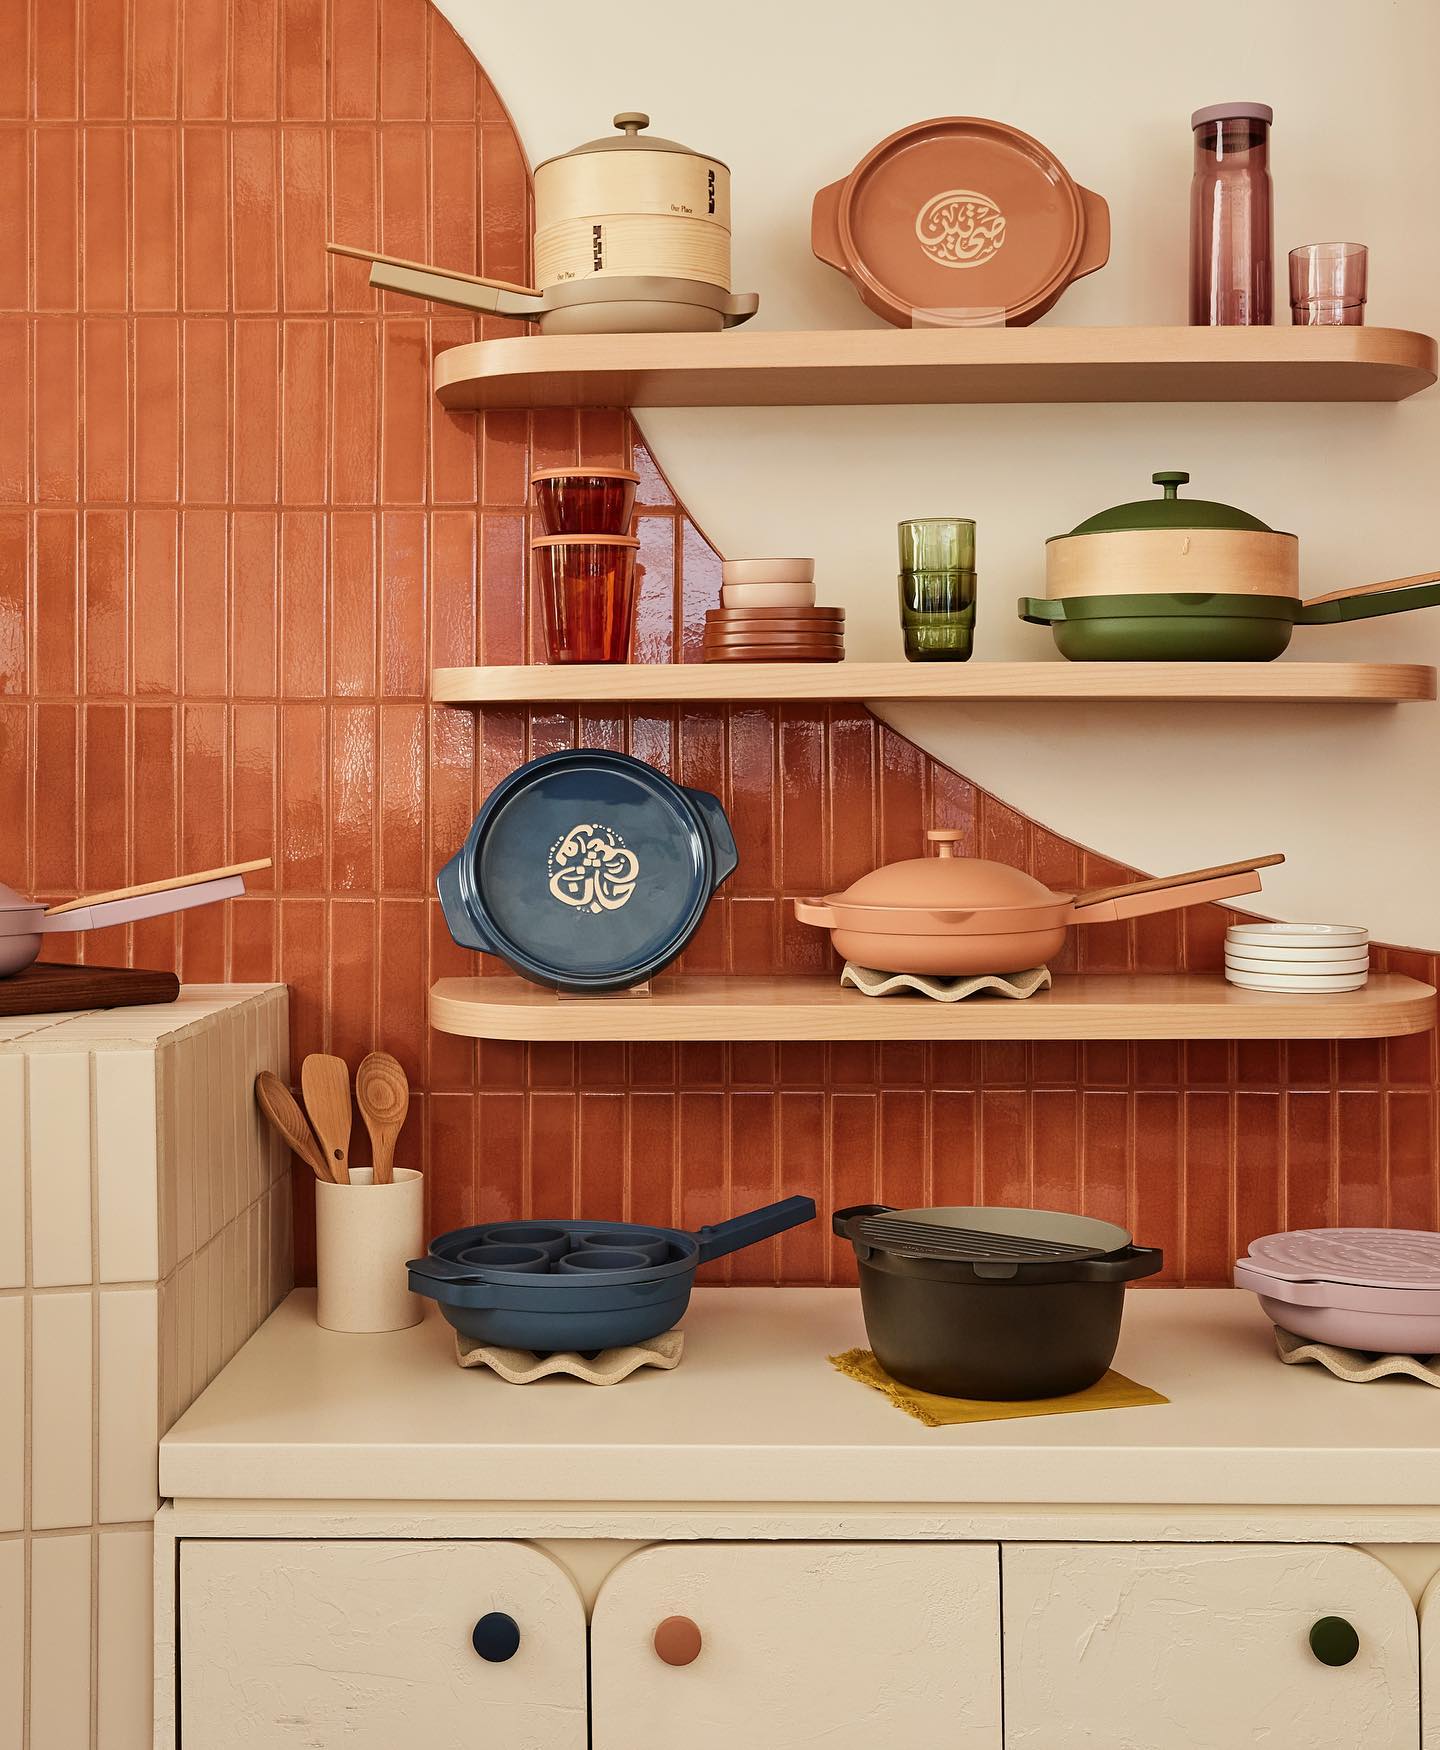 Various pots and pans from Our Place are on display in a retro inspired kitchen wall.